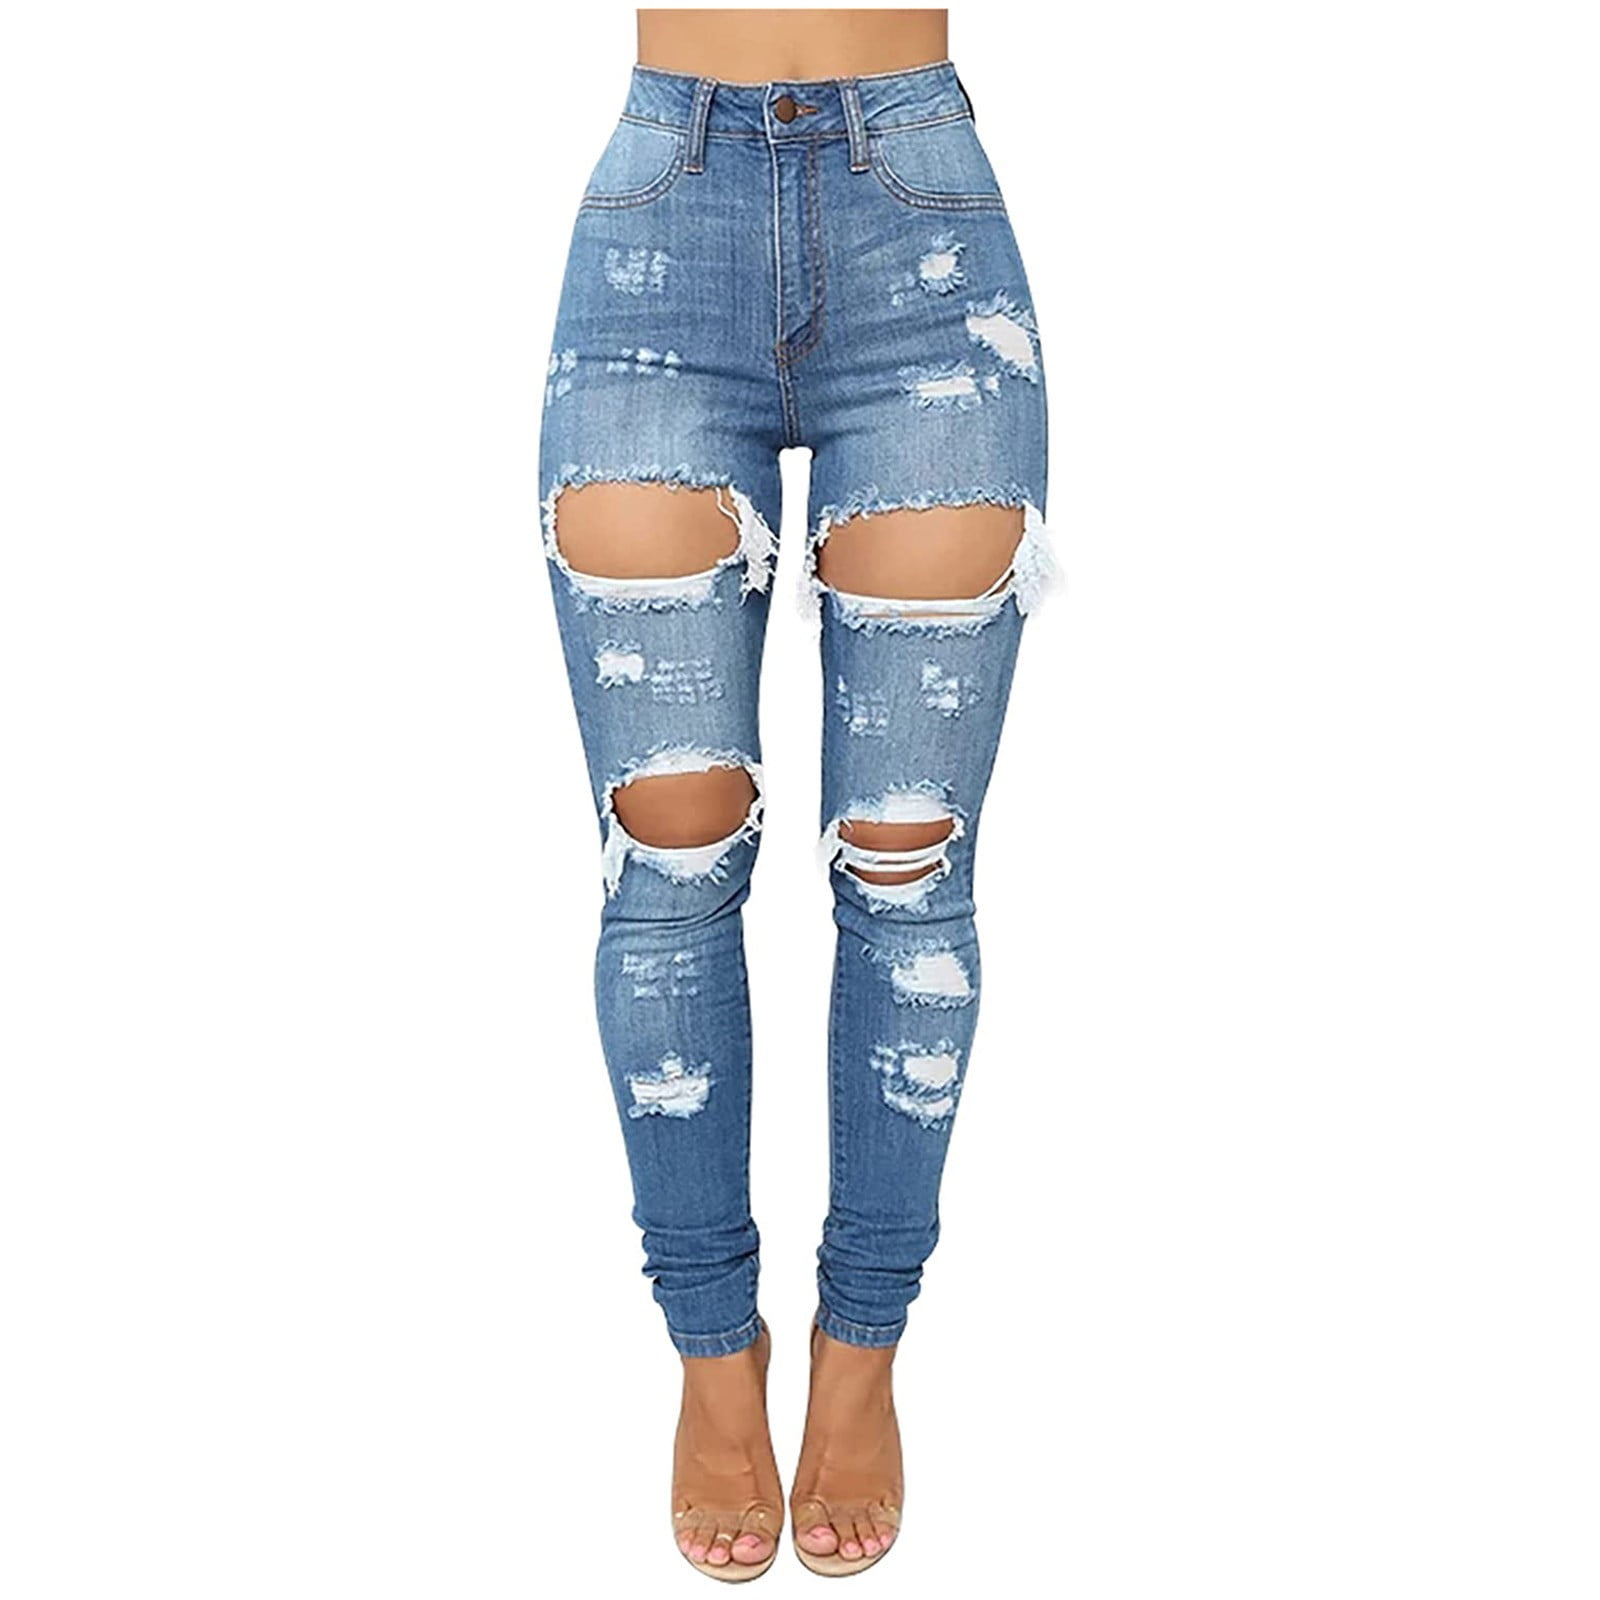 Jeans For Women's High Waisted Ripped Jeans For Women Butt Lift Distressed Stretch Juniors Skinny Jeans Blue - Walmart.com